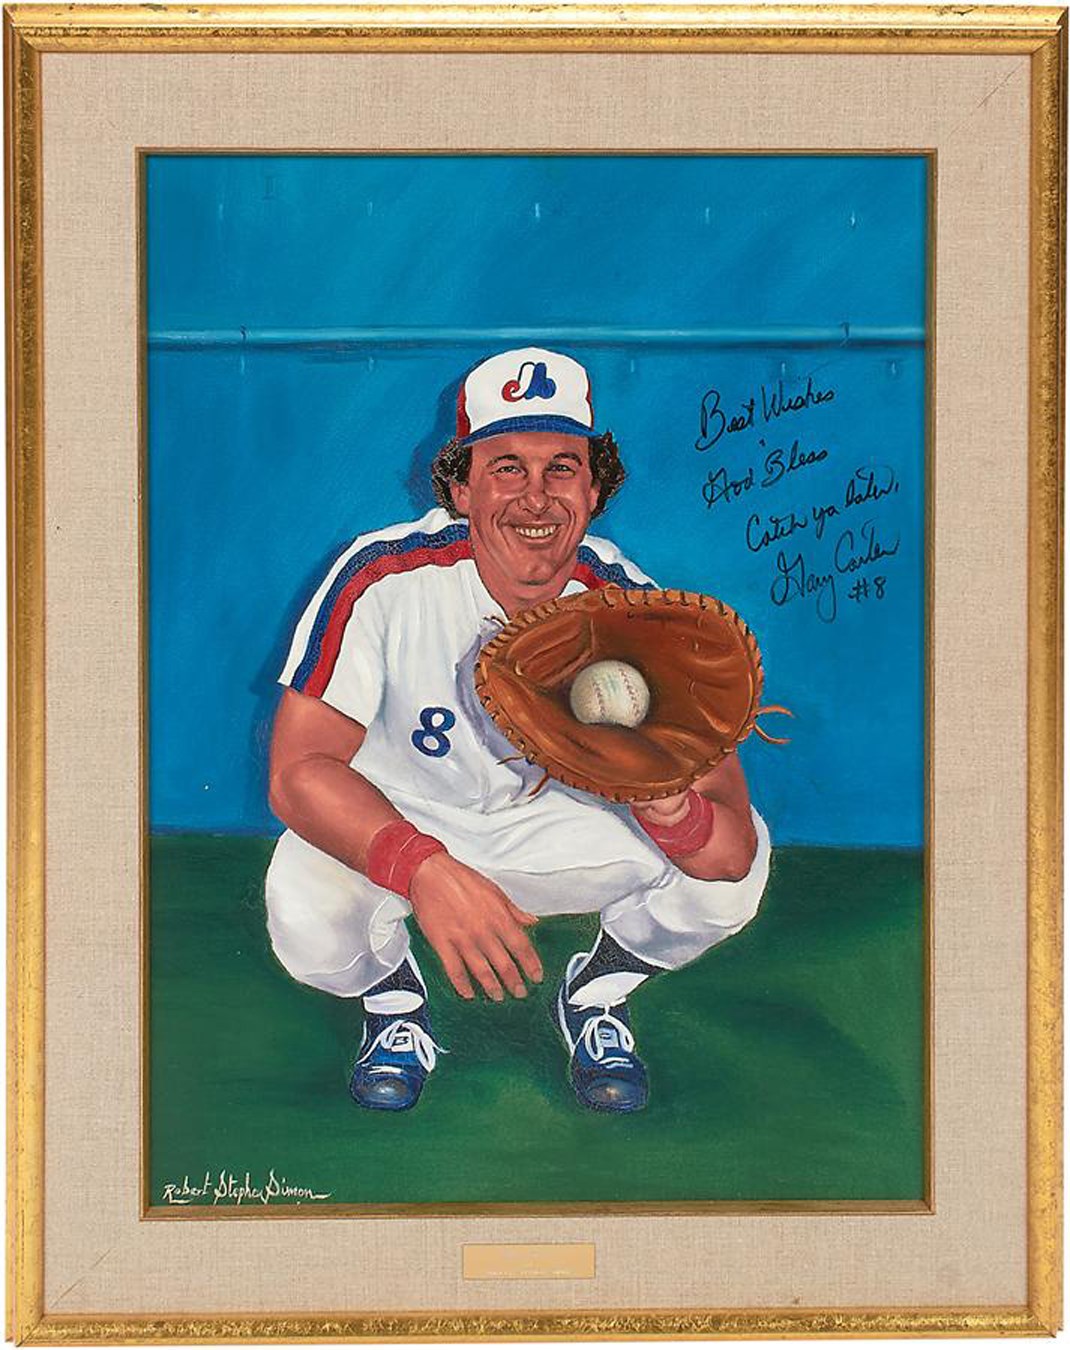 NY Yankees, Giants & Mets - Gary Carter Personally Autographed Painting by Robert Stephen Simon